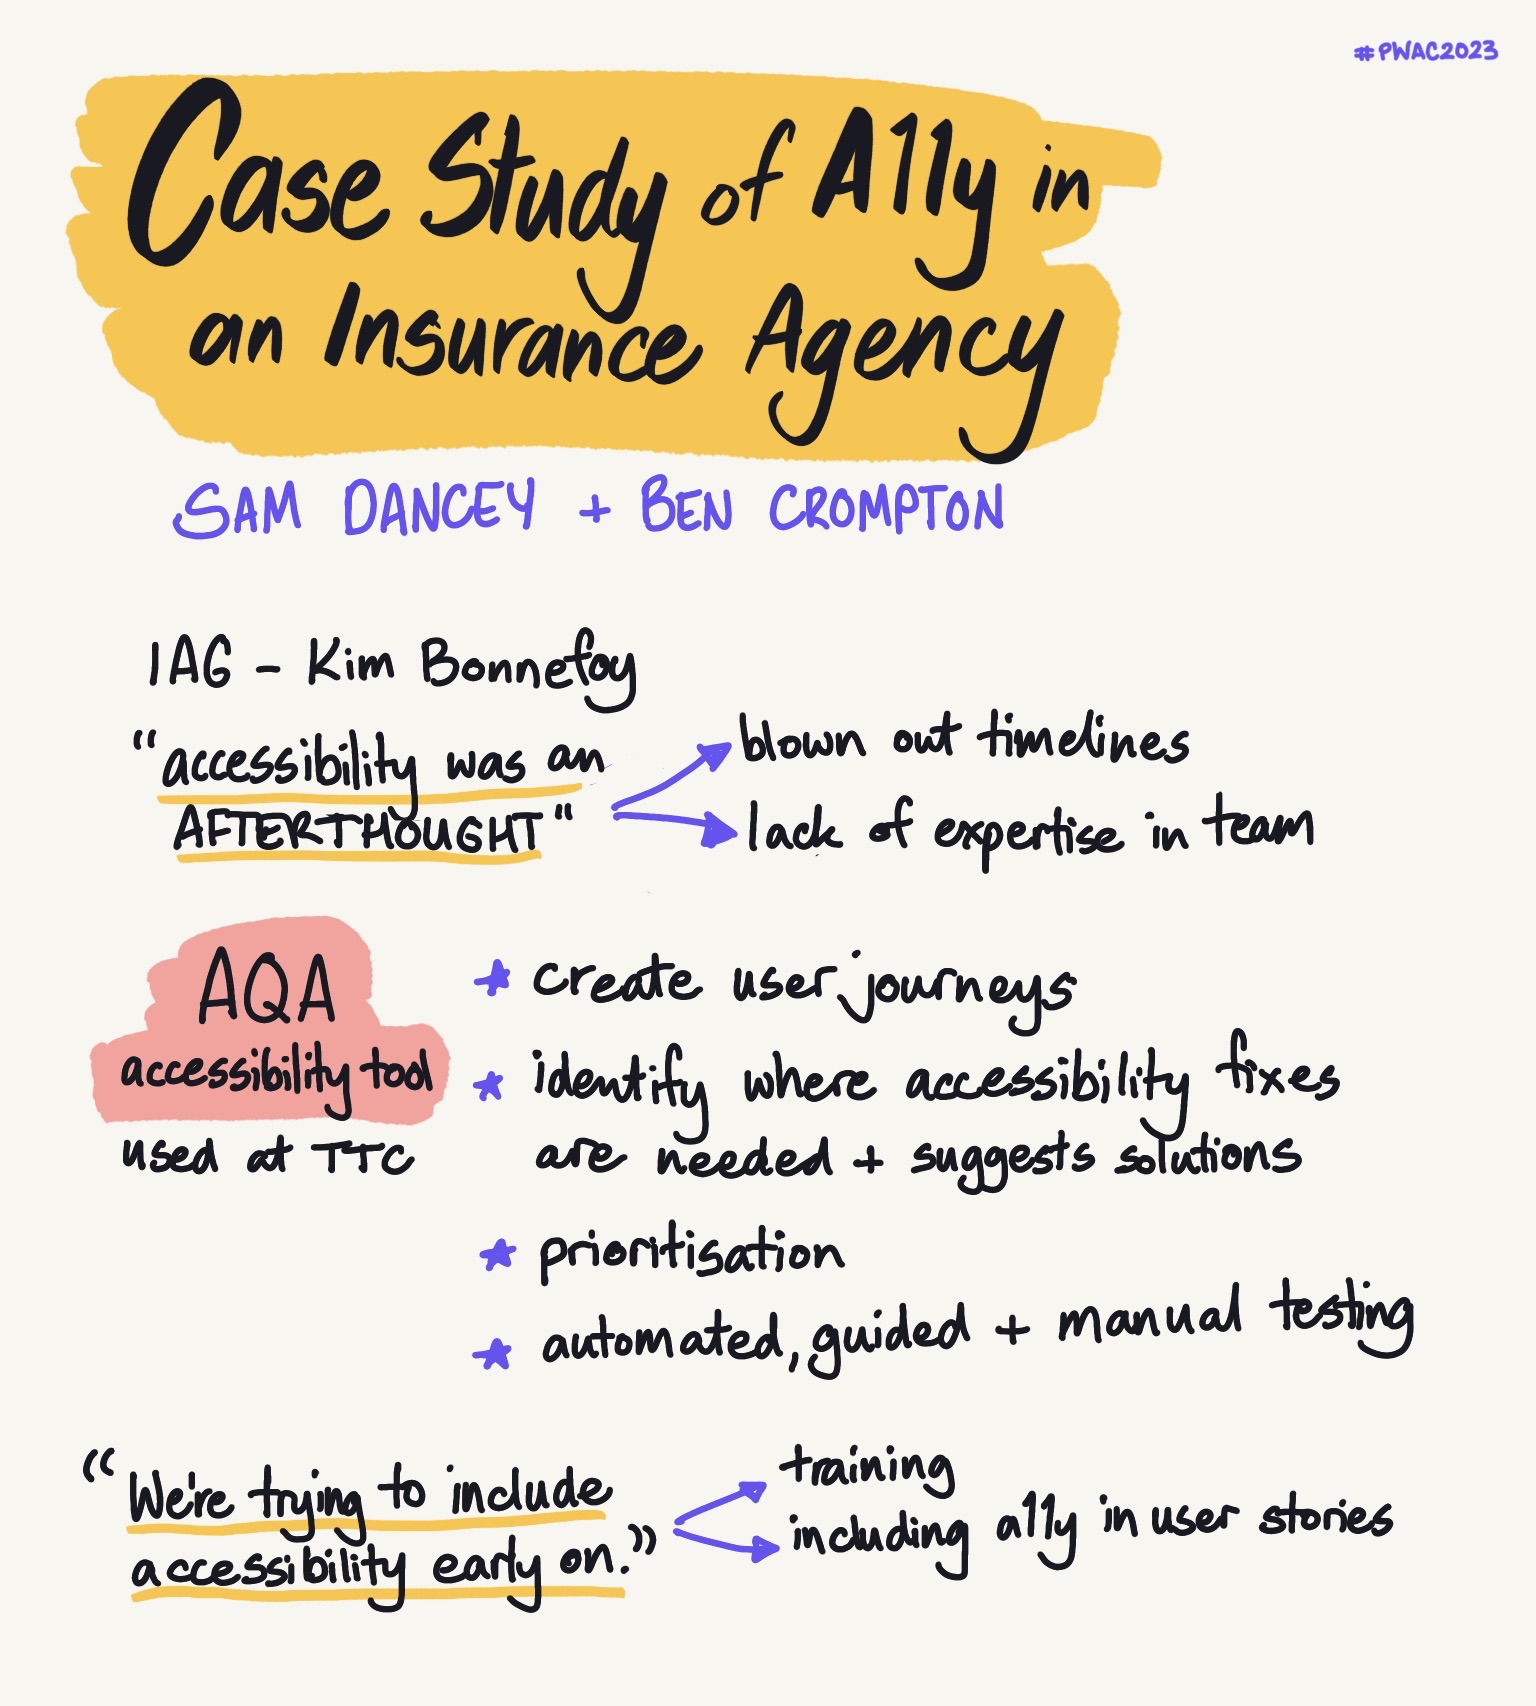 sketchnote of Case study of accessibility in an insurance agency, a talk by Sam Dancey, Ben Crompton, and Kim Bonnefoy